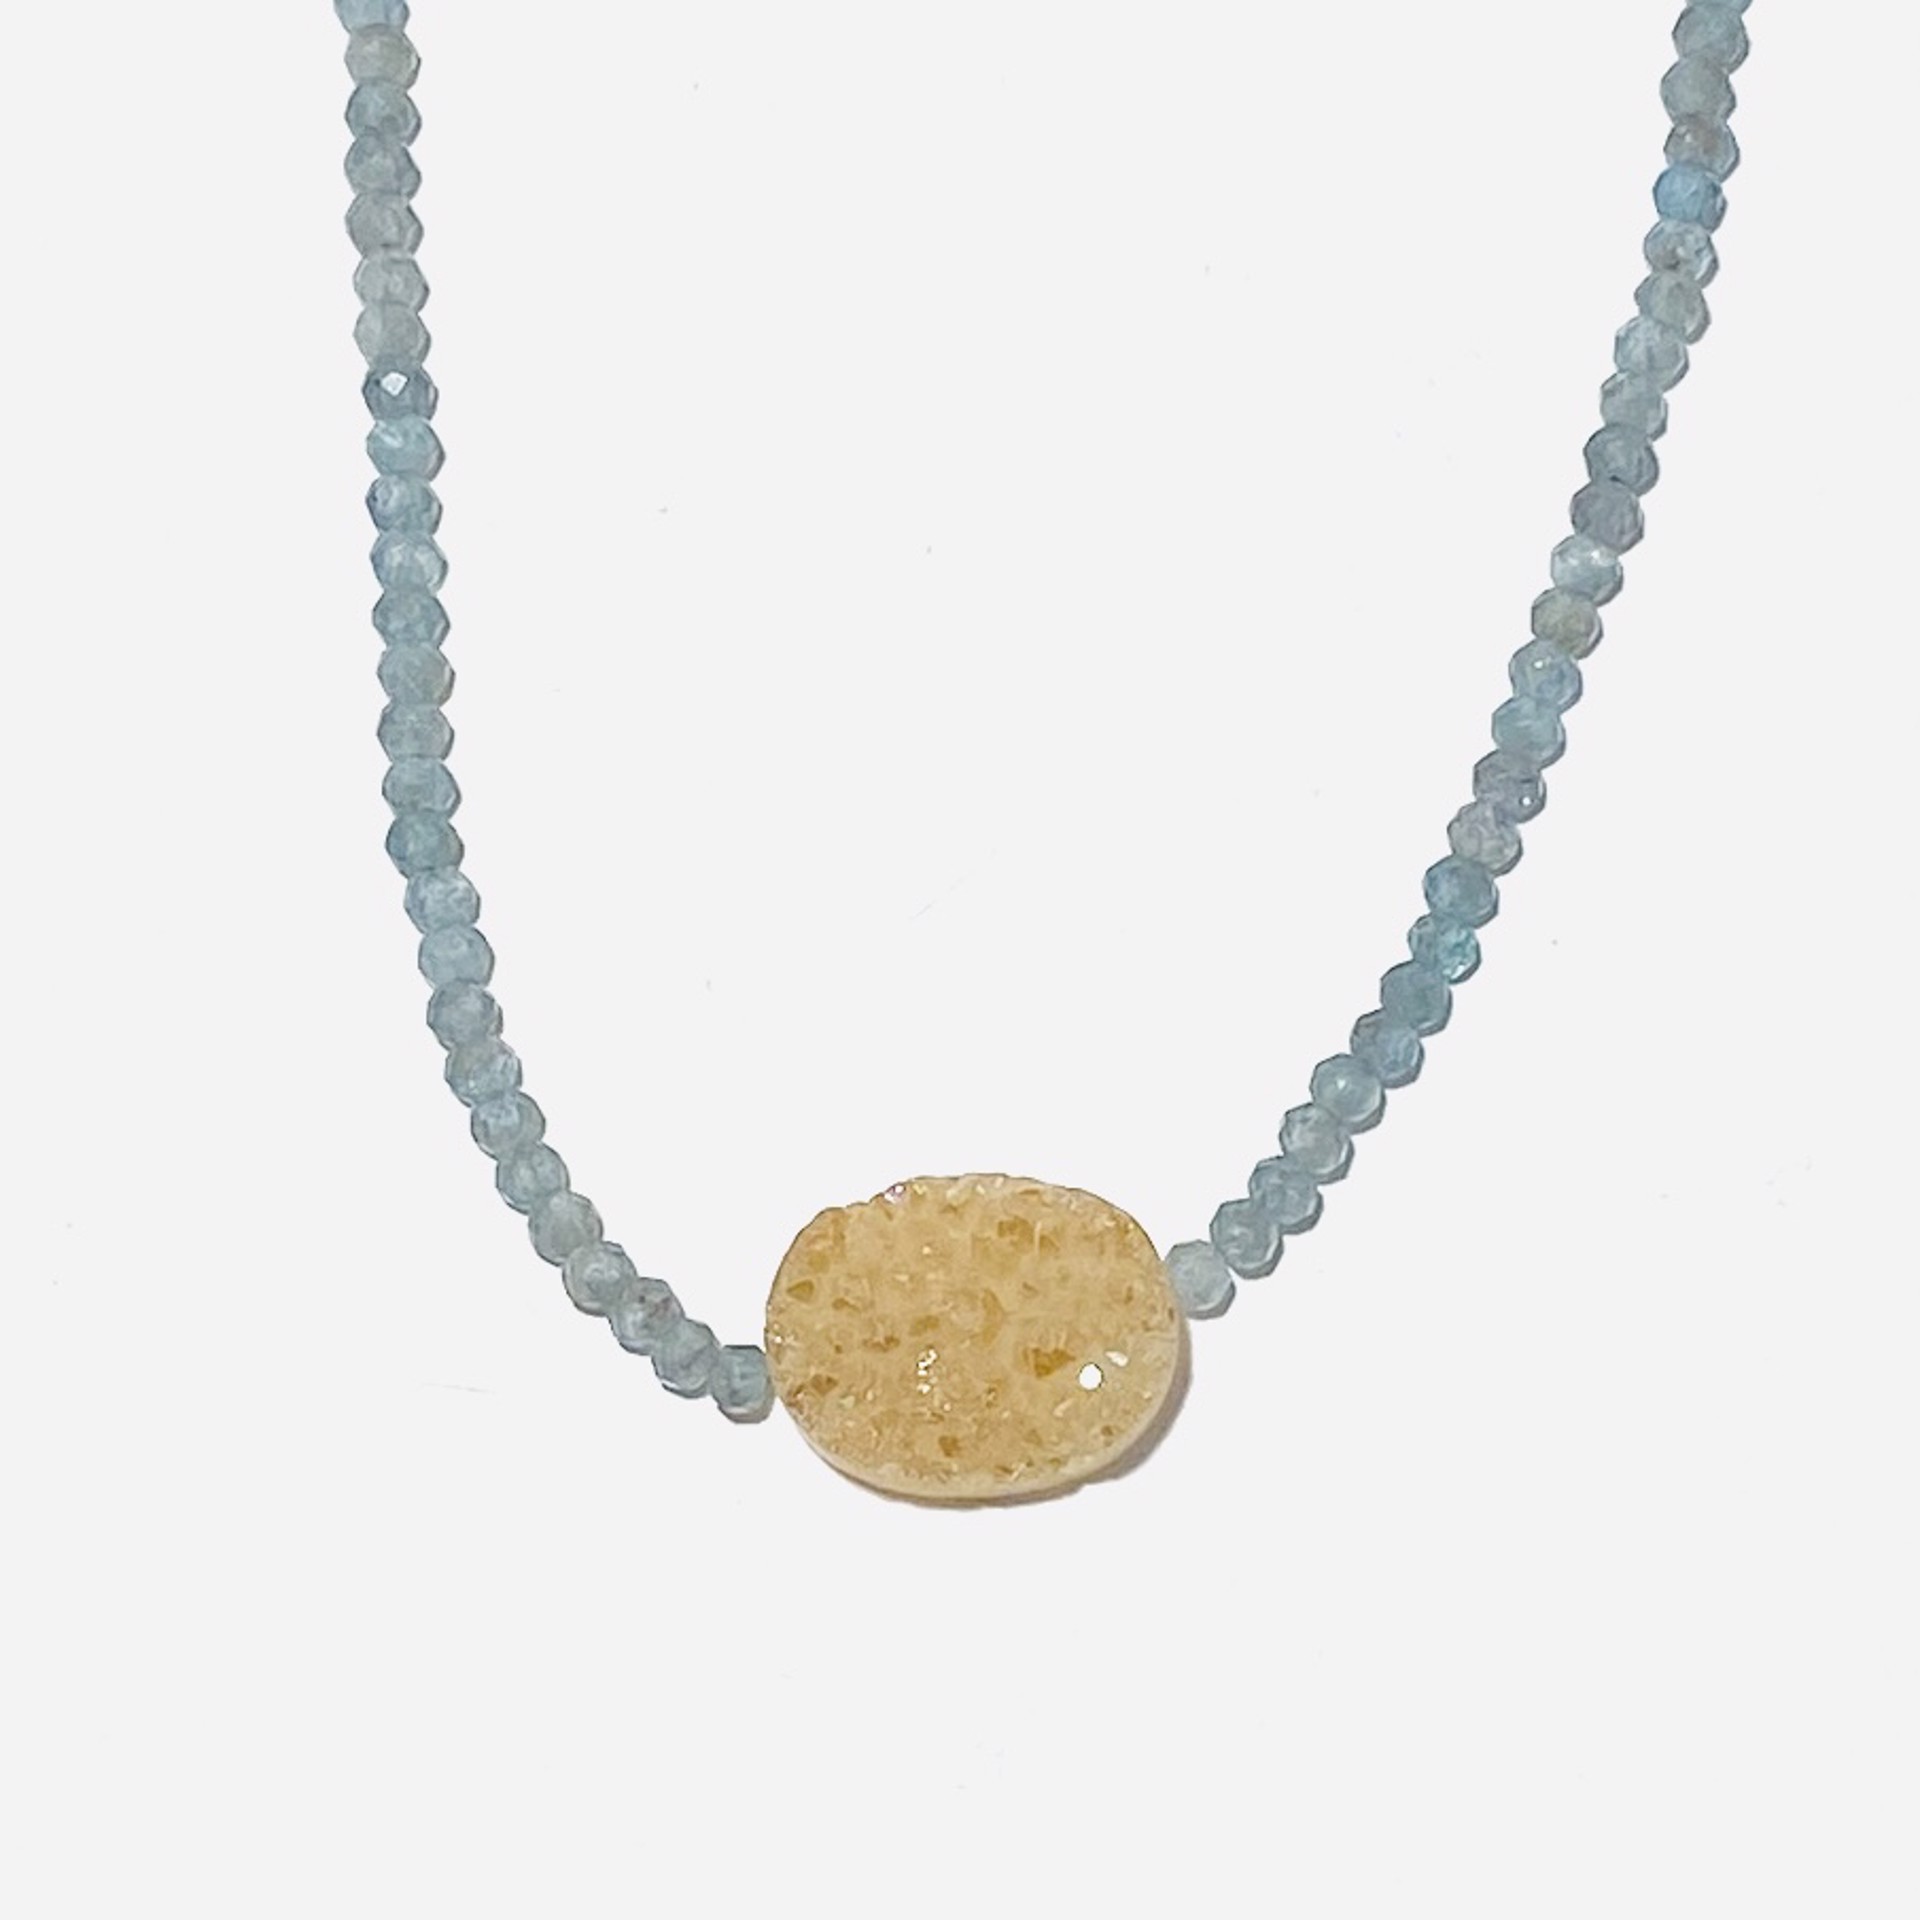 Faceted Aquamarine Oval Druzy Focal Necklace by Nance Trueworthy